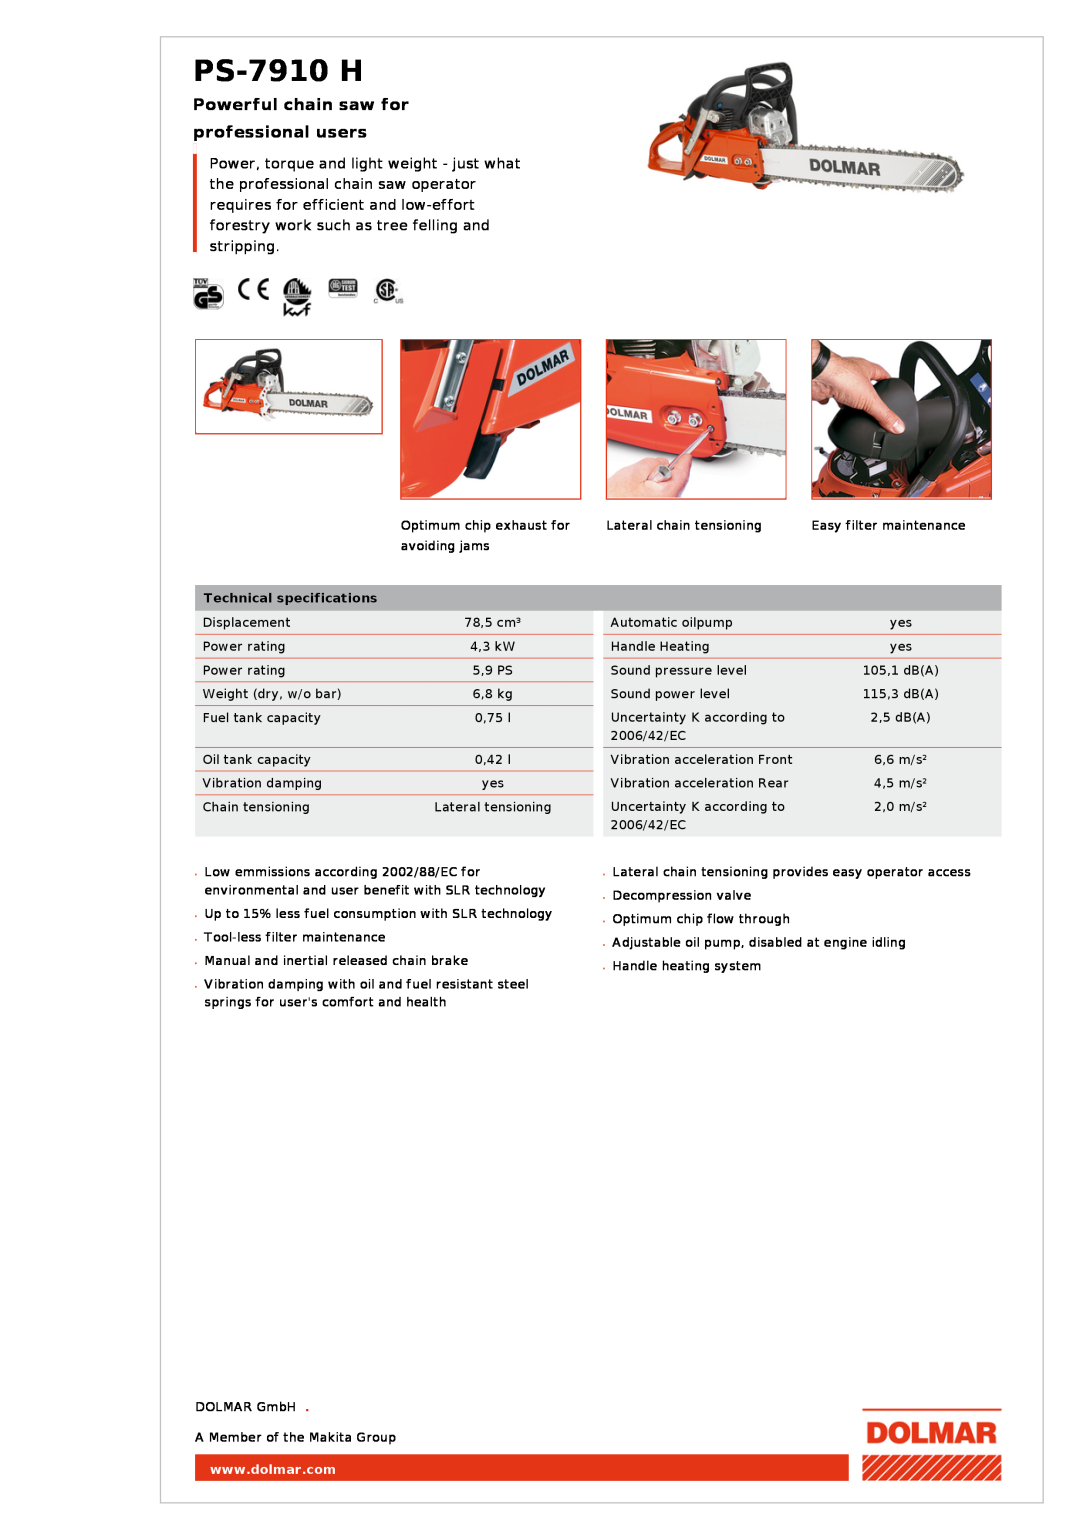 Dolmar PS-7910 H technical specifications PS-7910H, Powerful chain saw for professional users, Technical specifications 